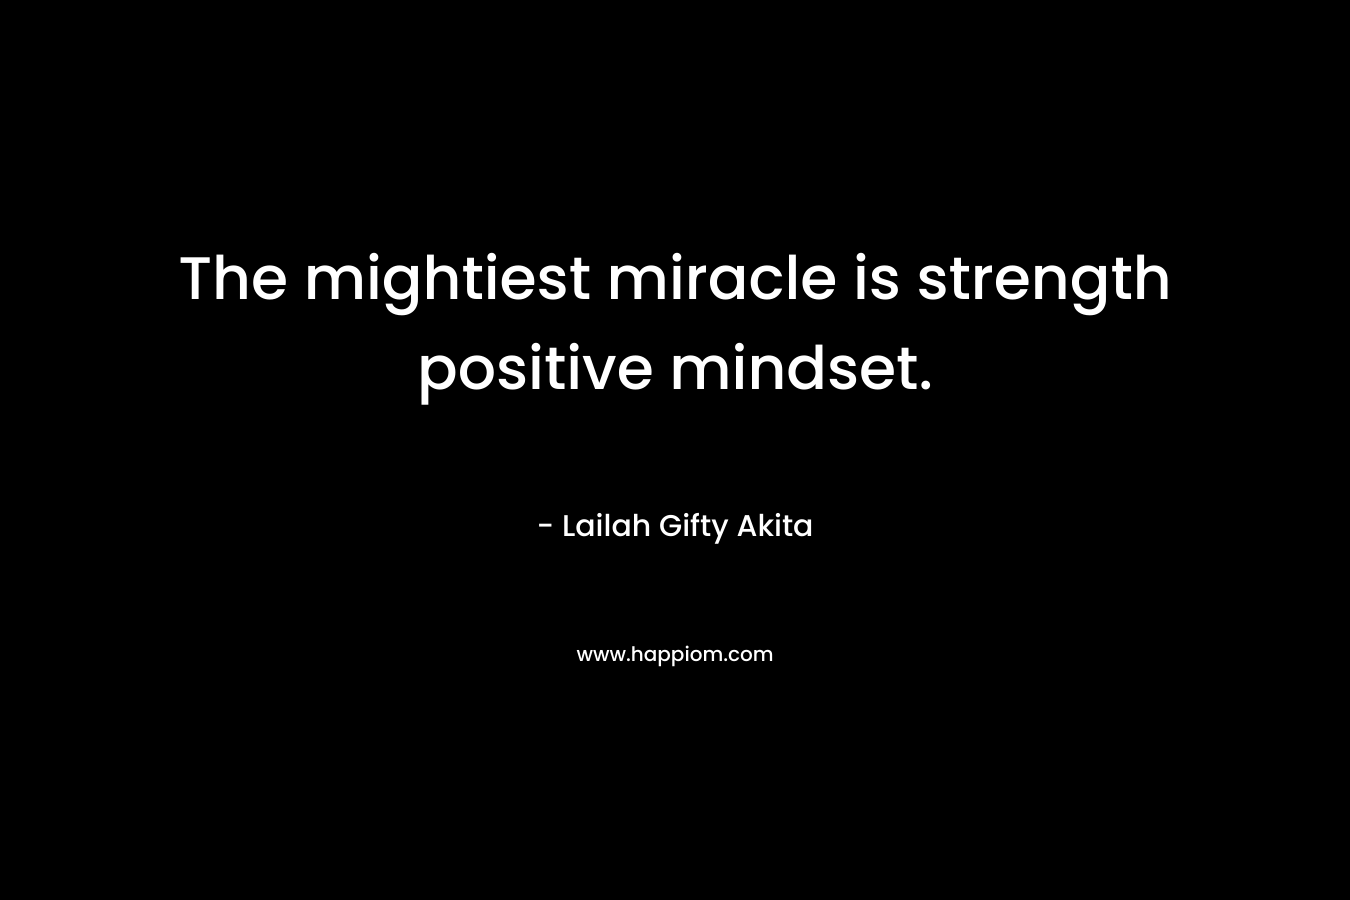 The mightiest miracle is strength positive mindset. – Lailah Gifty Akita